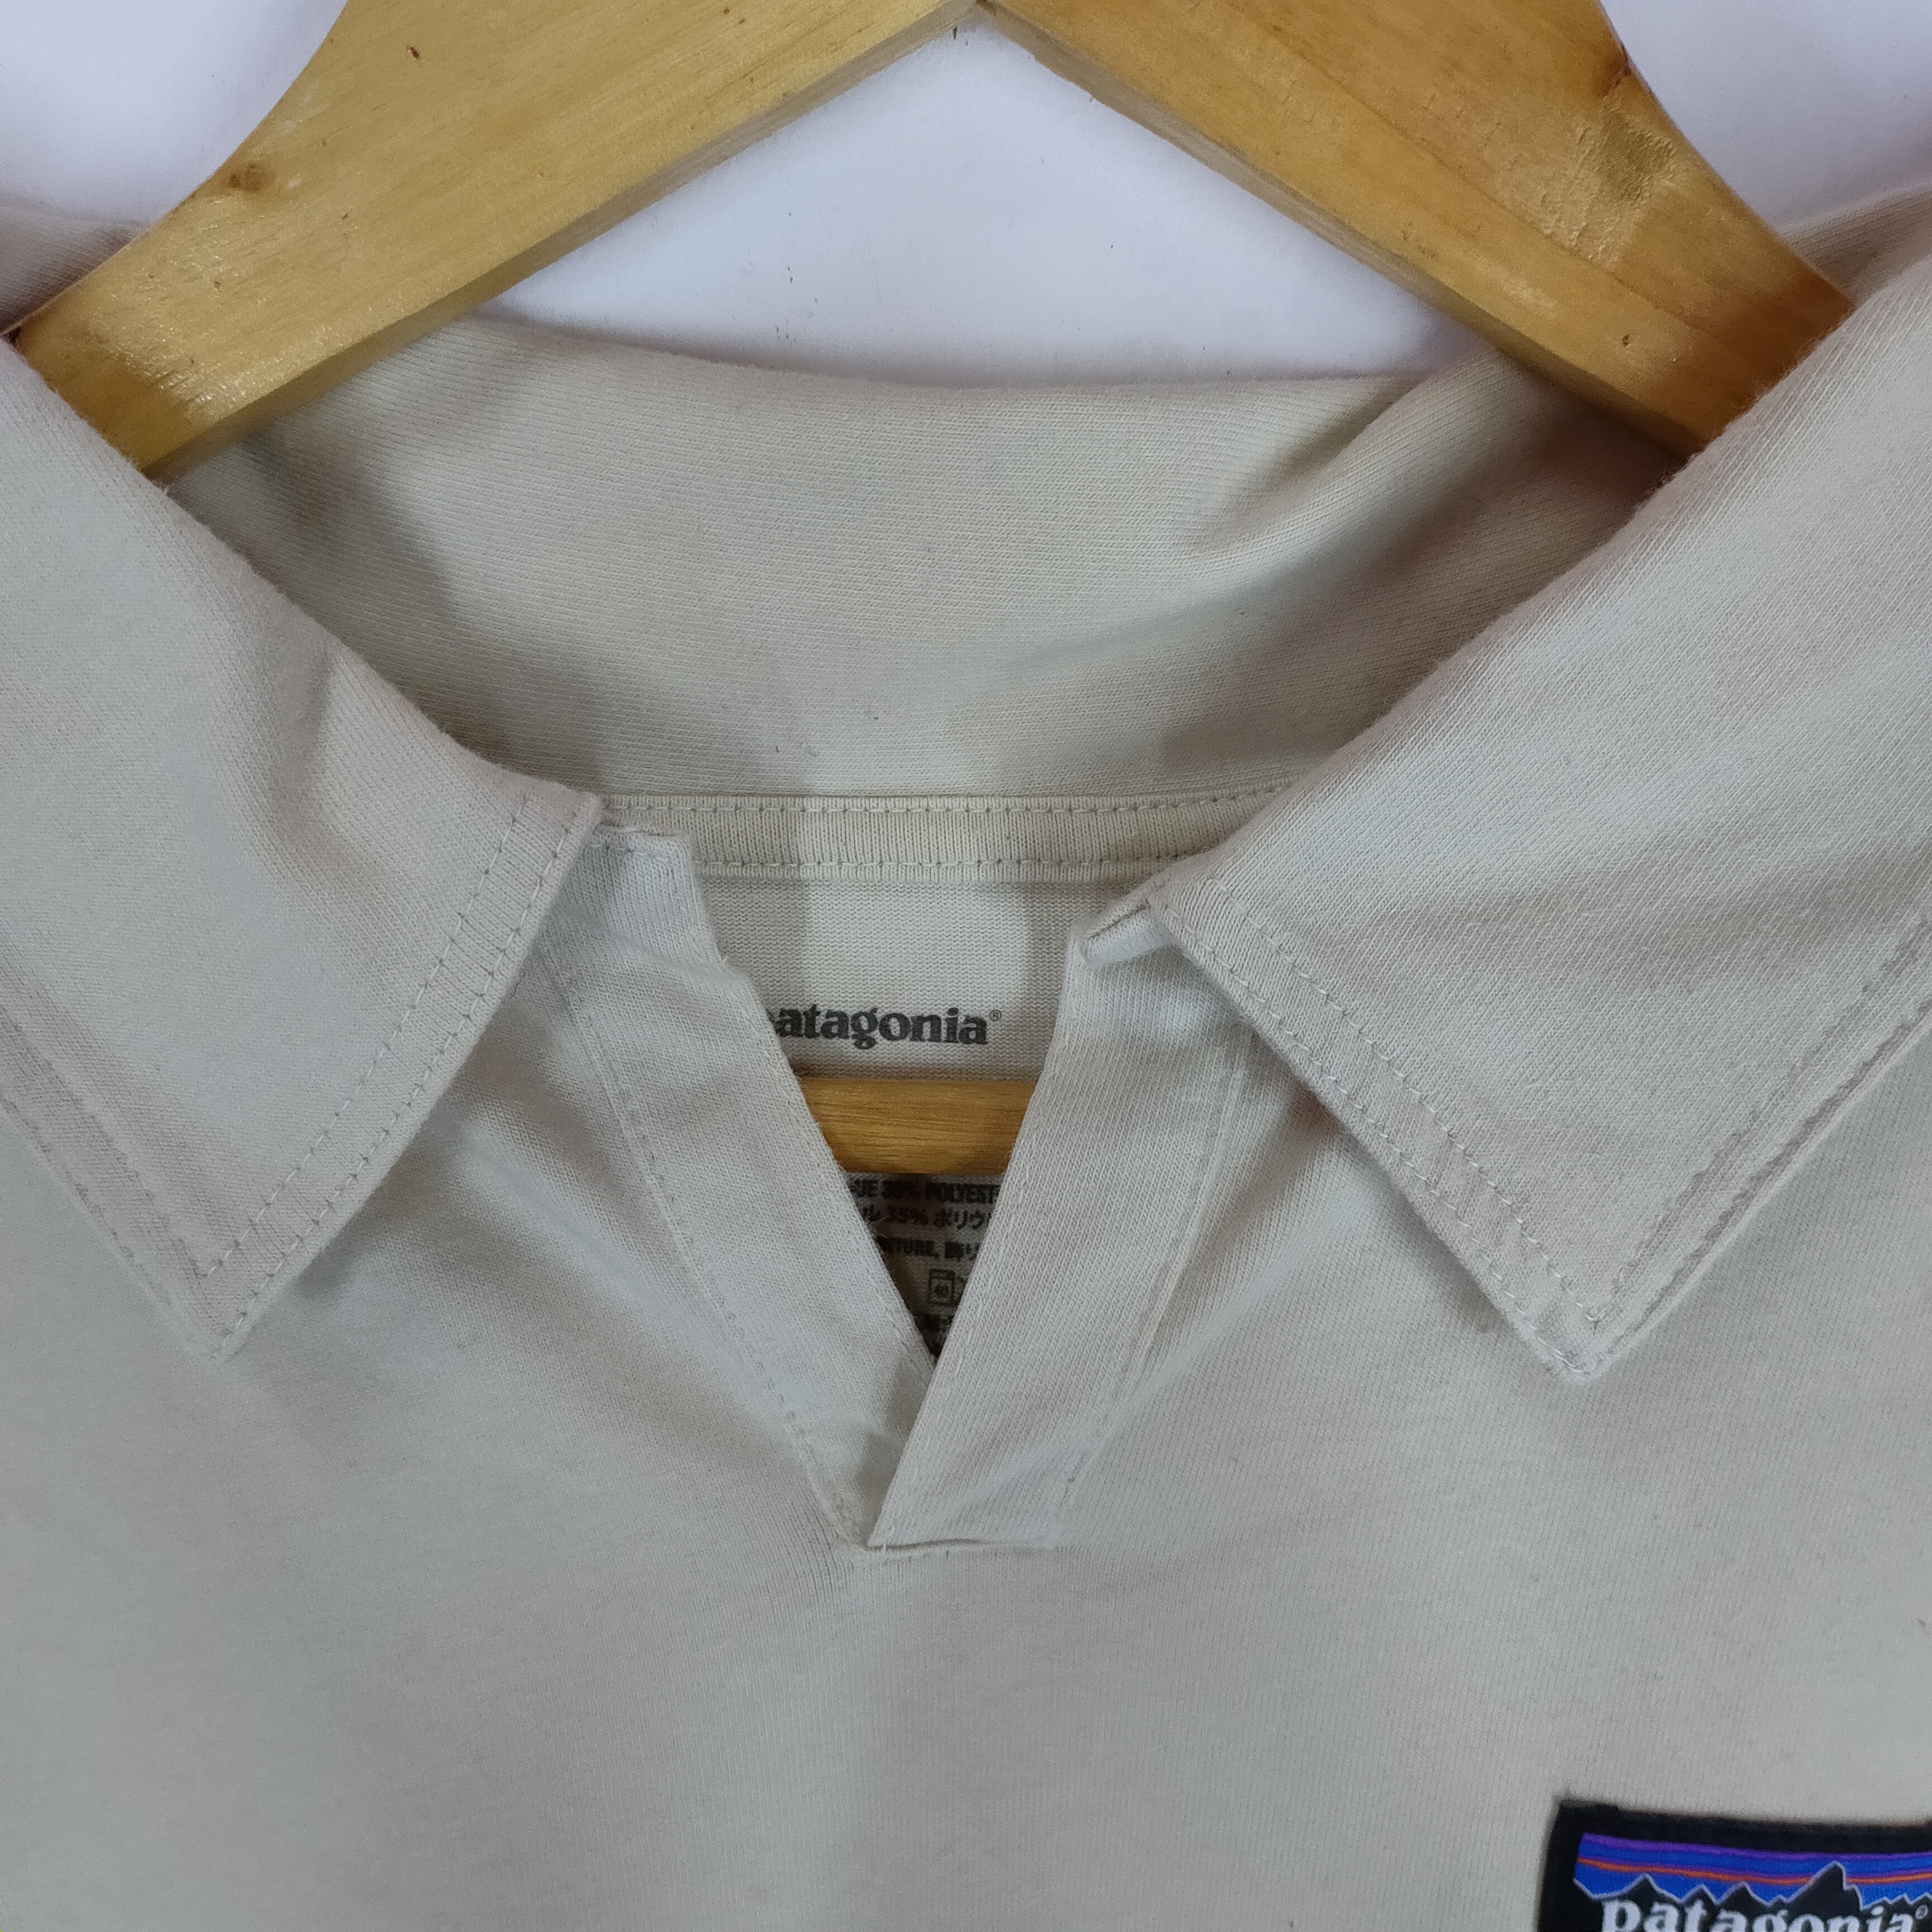 Vintage - VINTAGE PATAGONIA Sharp Collar With Patches Shirt - 3